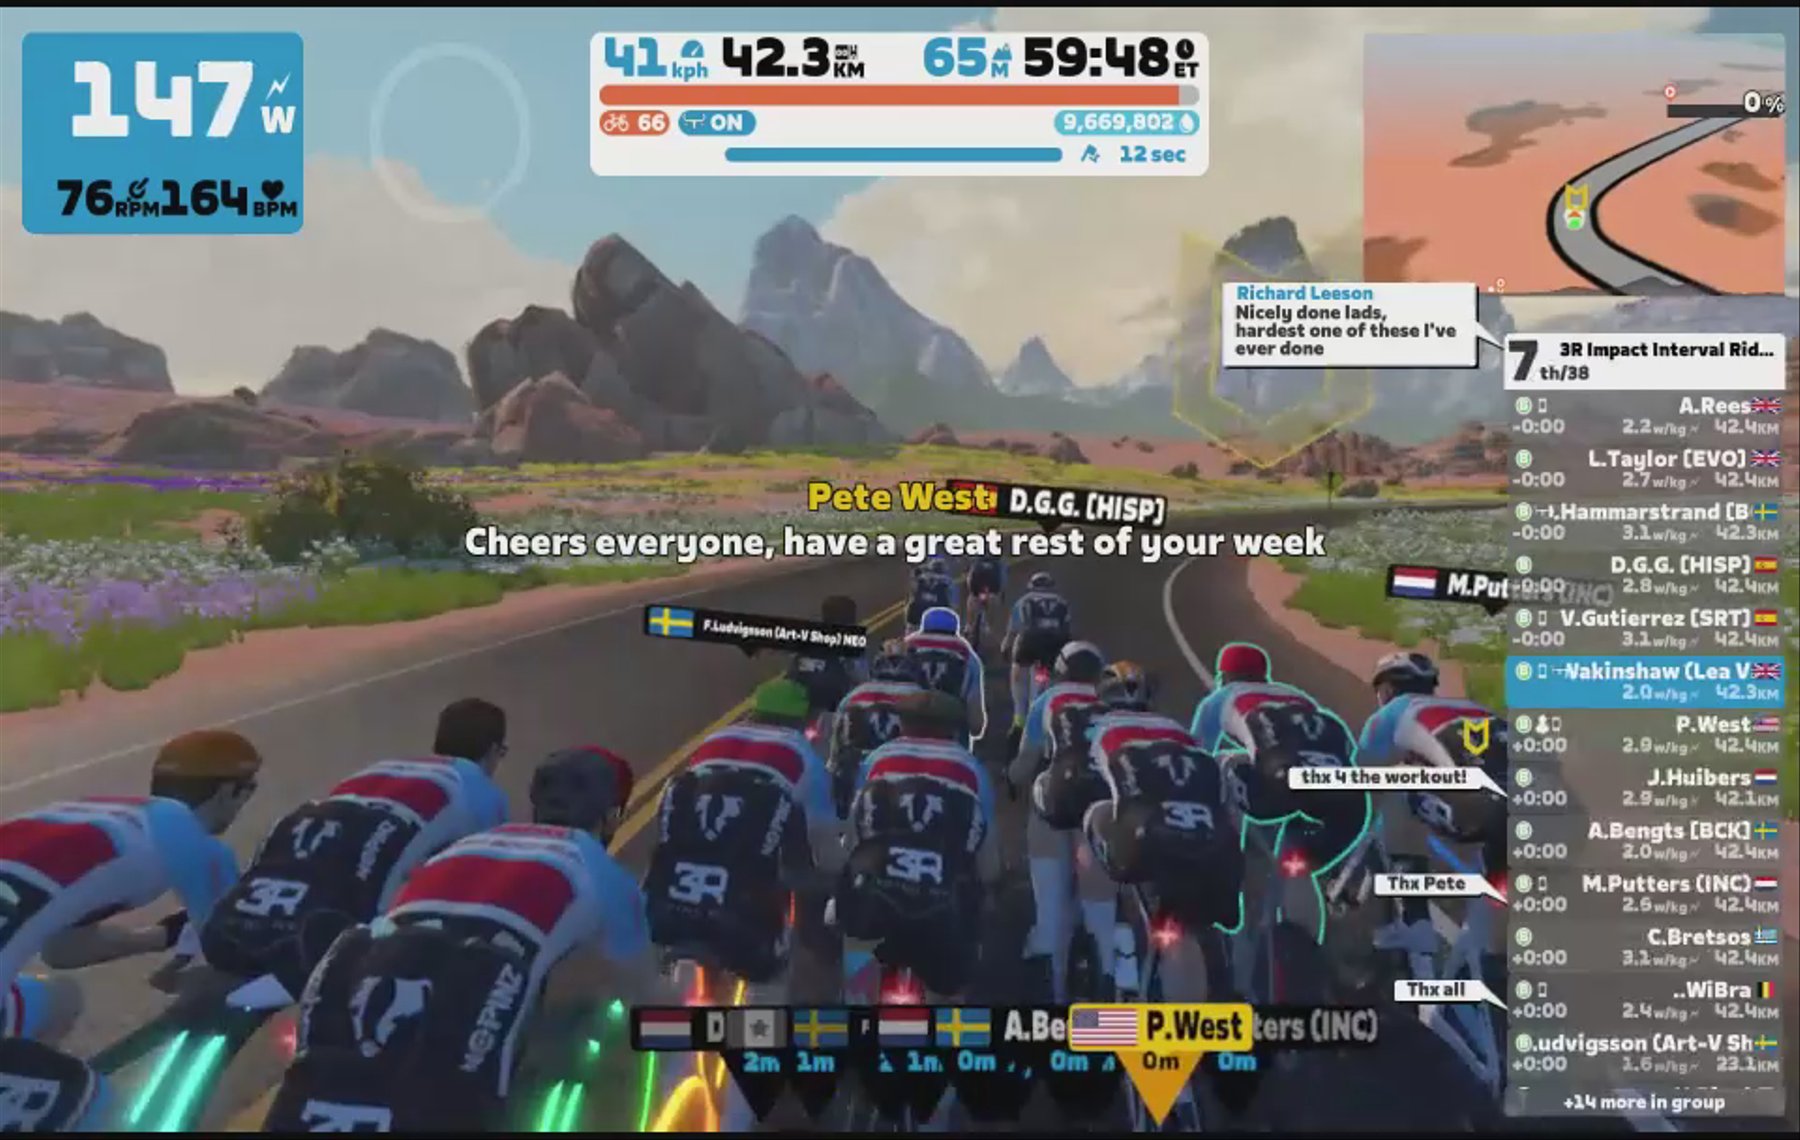 Zwift - Group Ride: 3R Impact Interval Ride [~3.7-4.0w/kg avg] (B) on Tempus Fugit in Watopia